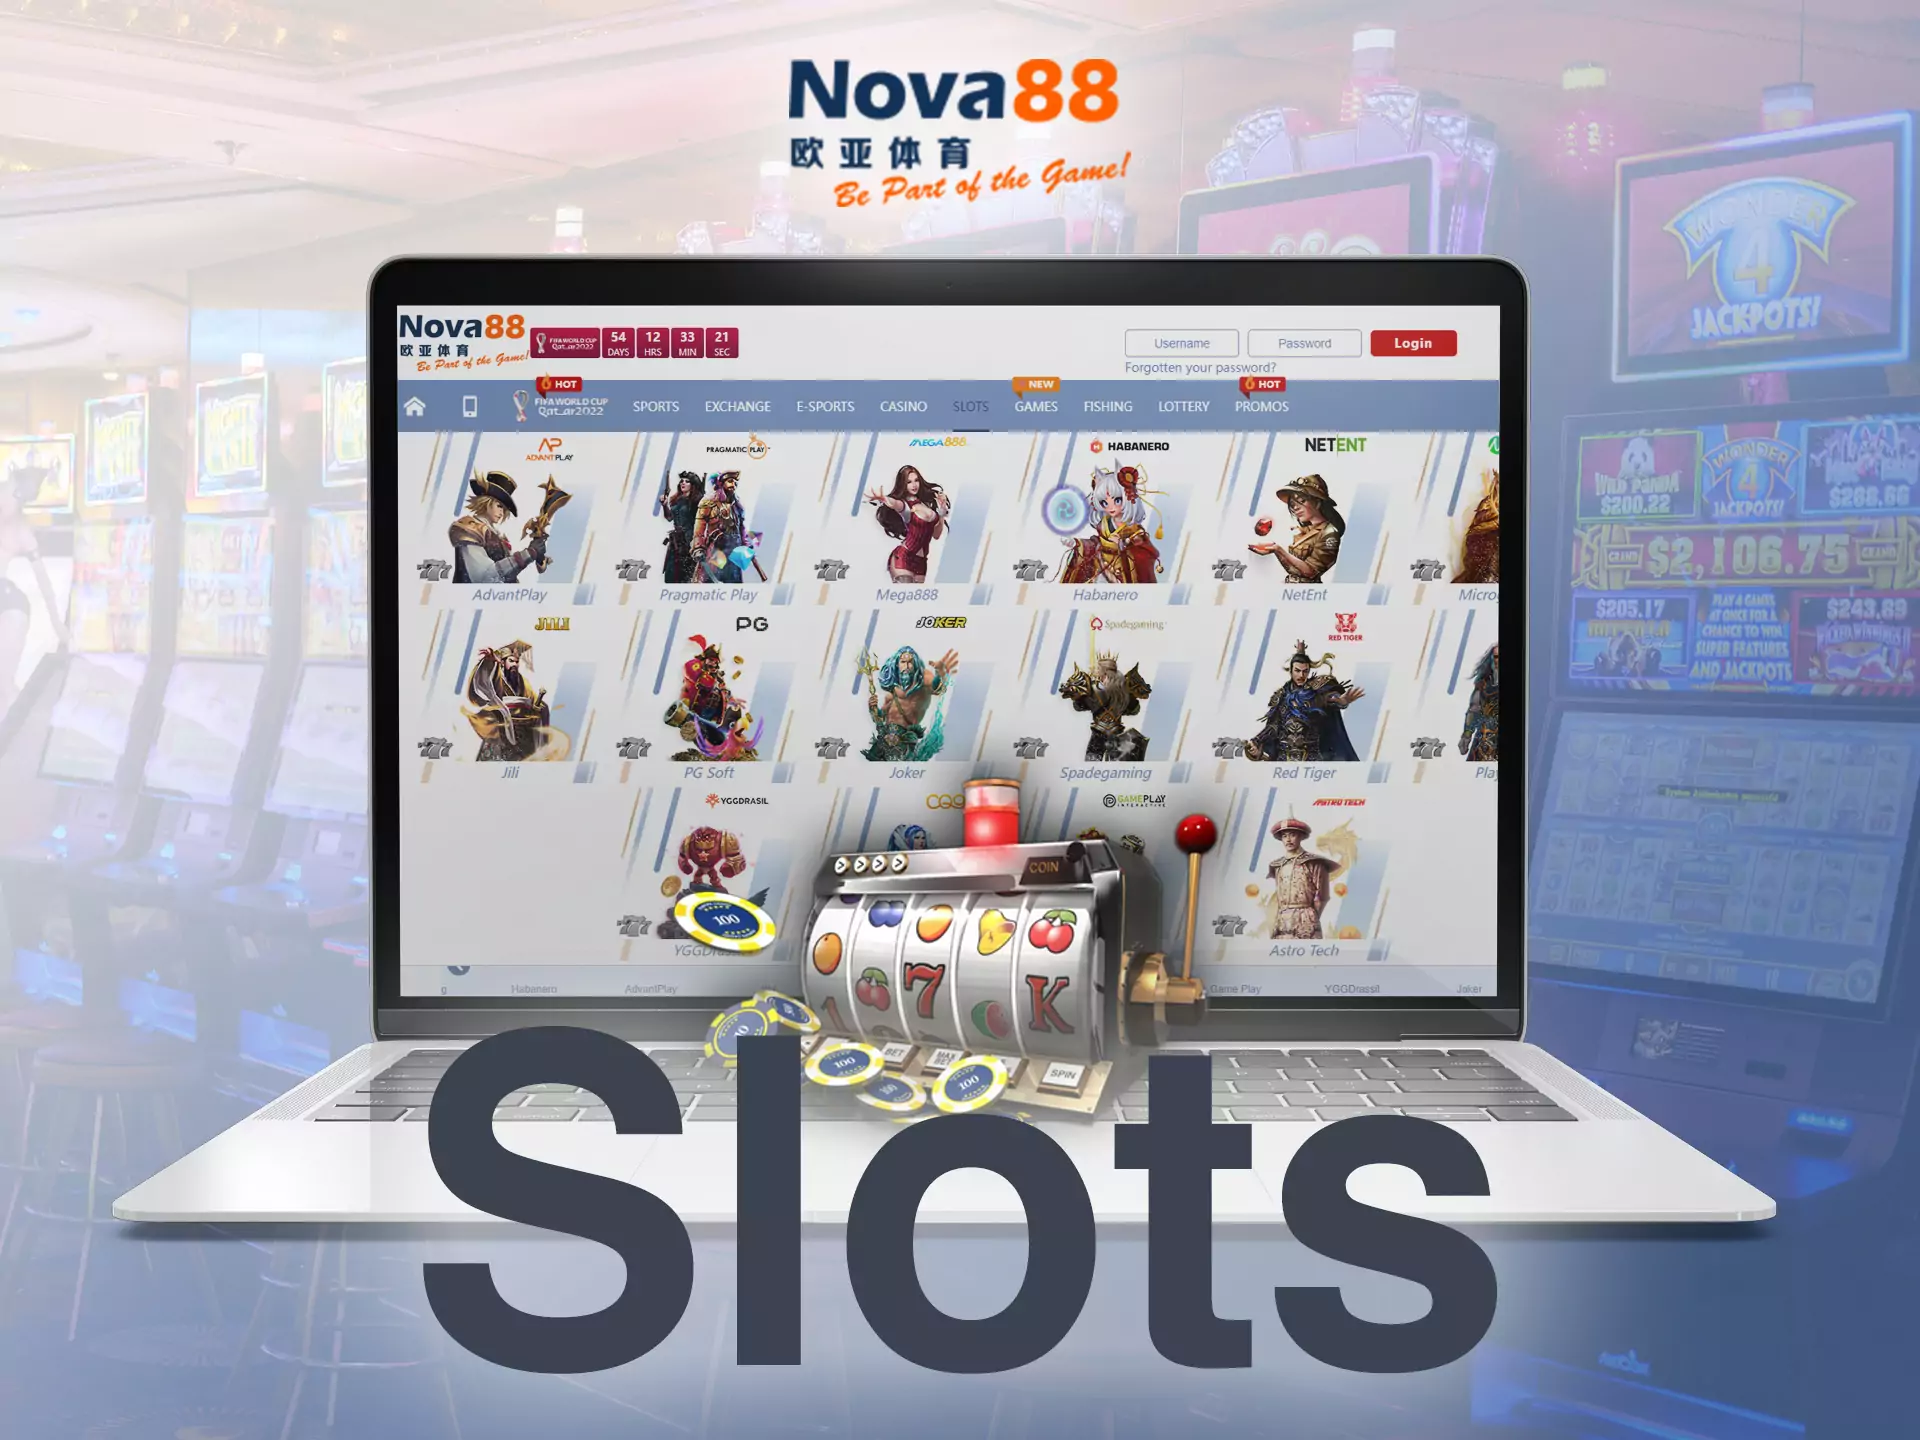 In the Nova88 online casino, there are hundreds of amazing colourful slots available for being played.